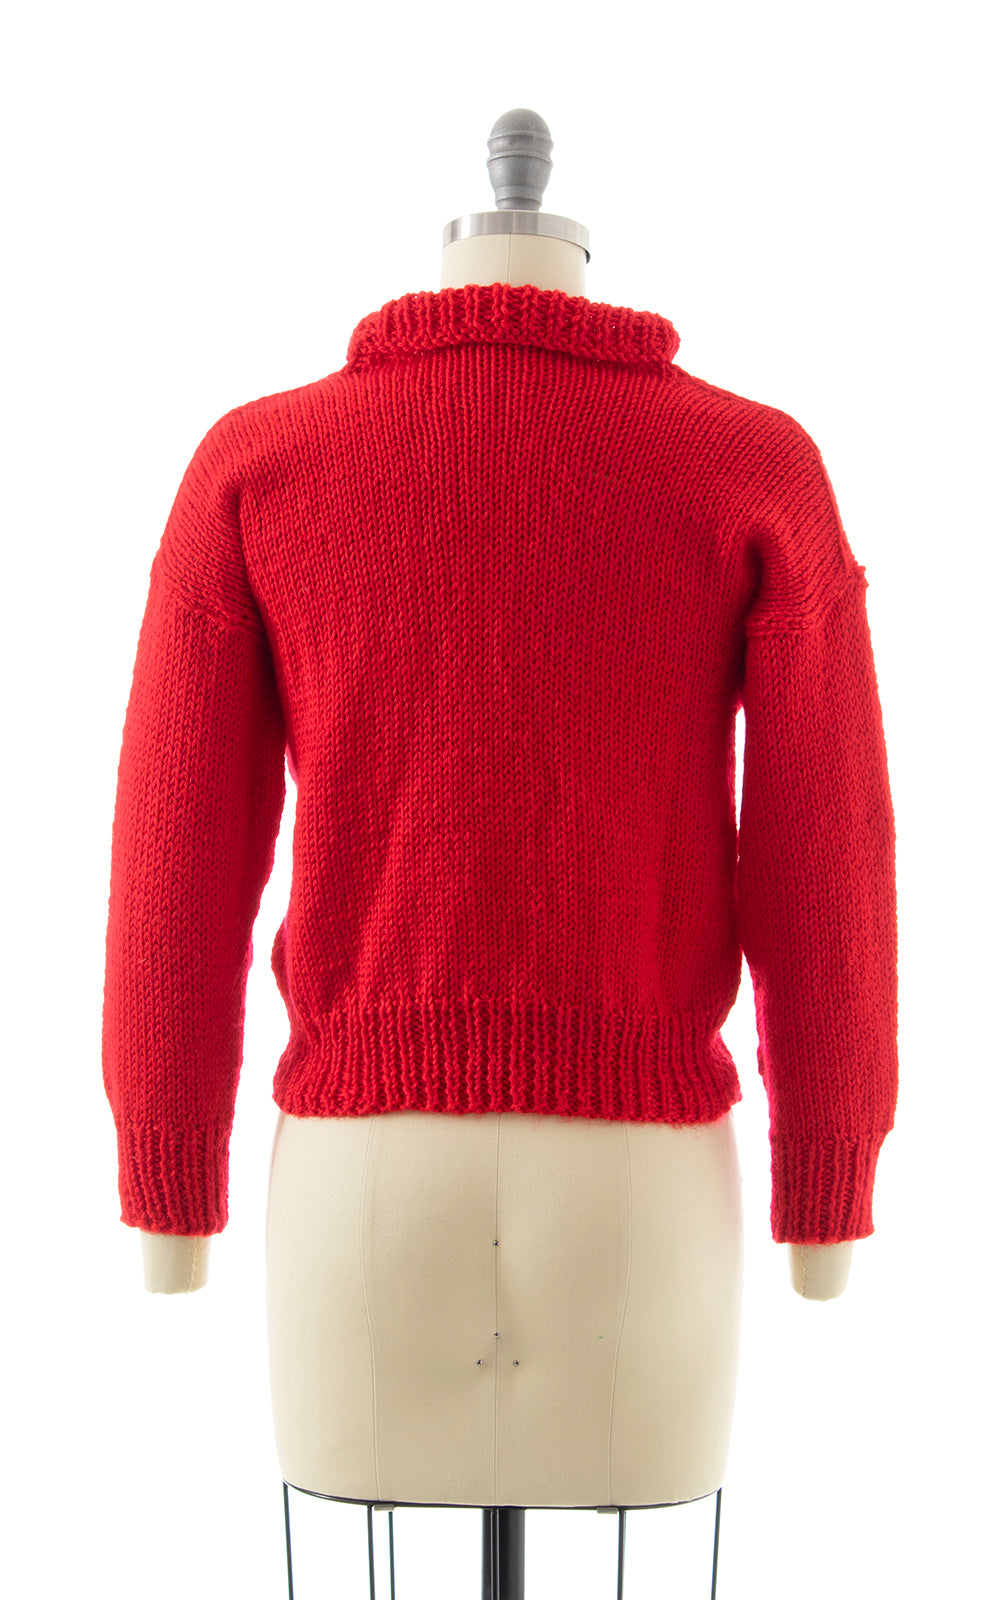 Vintage Red Soft Knit Turtleneck Sweater | x-small/small/medium